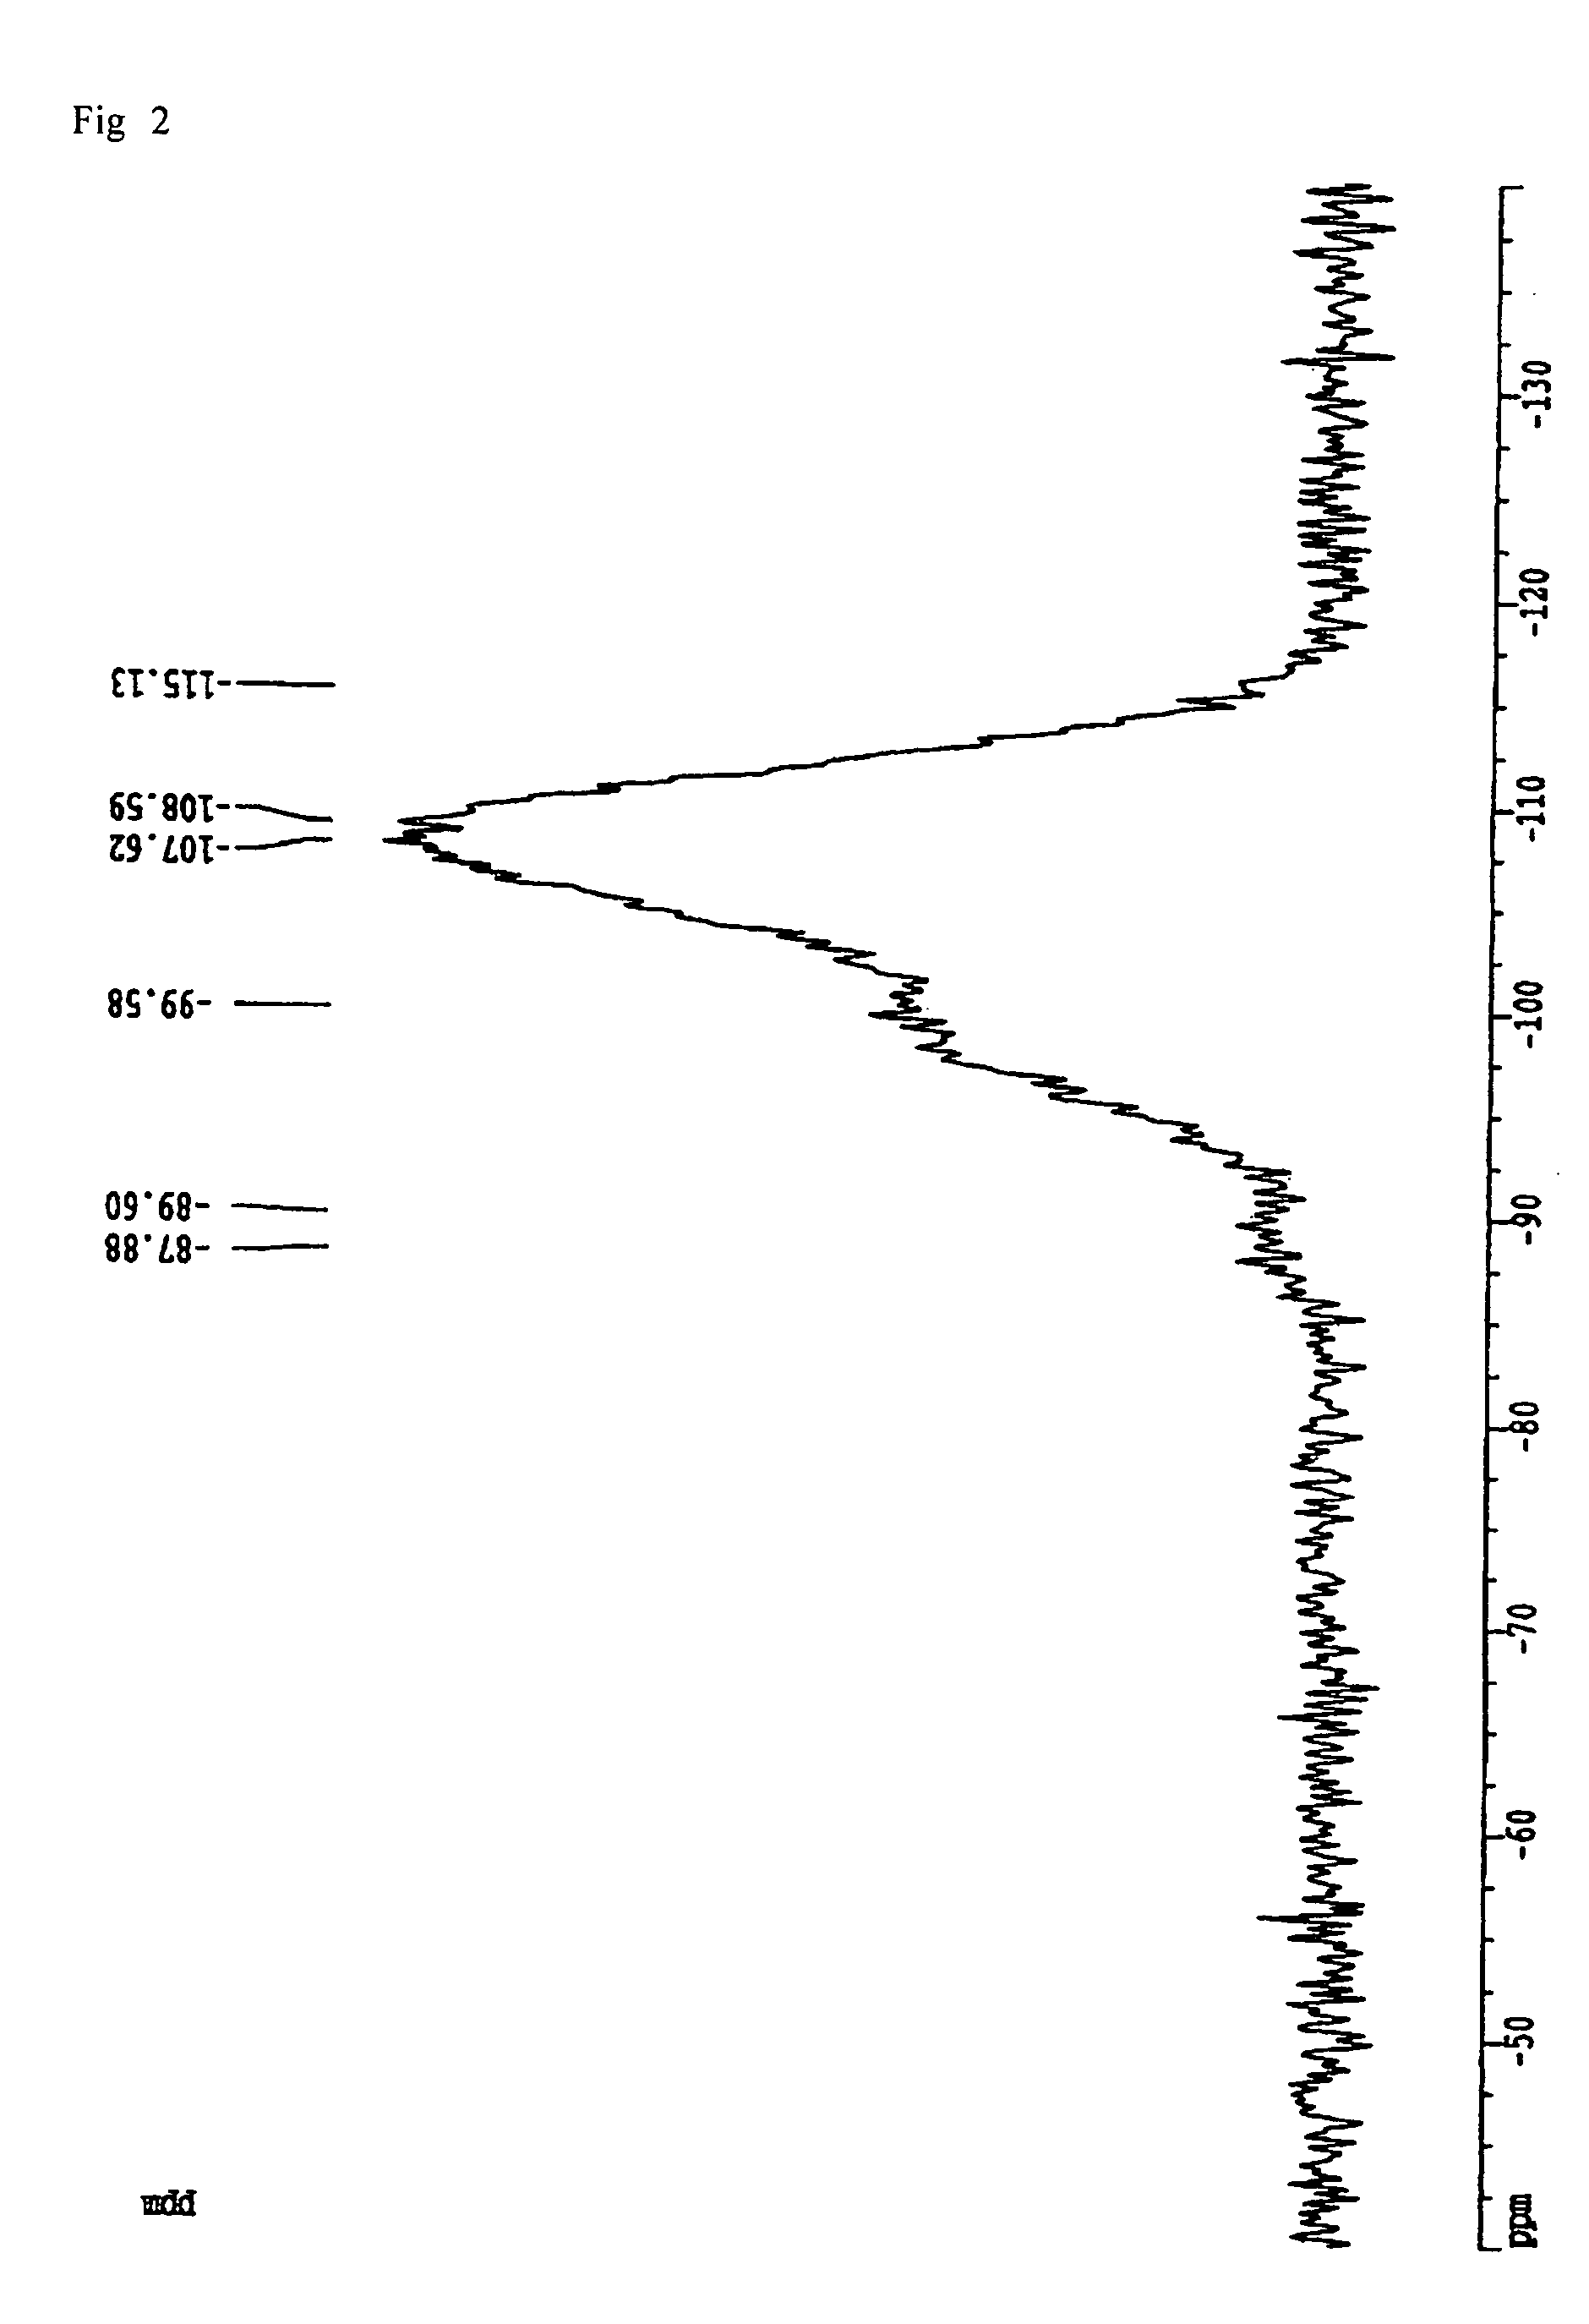 Resin composition, method of its composition, and cured formulation